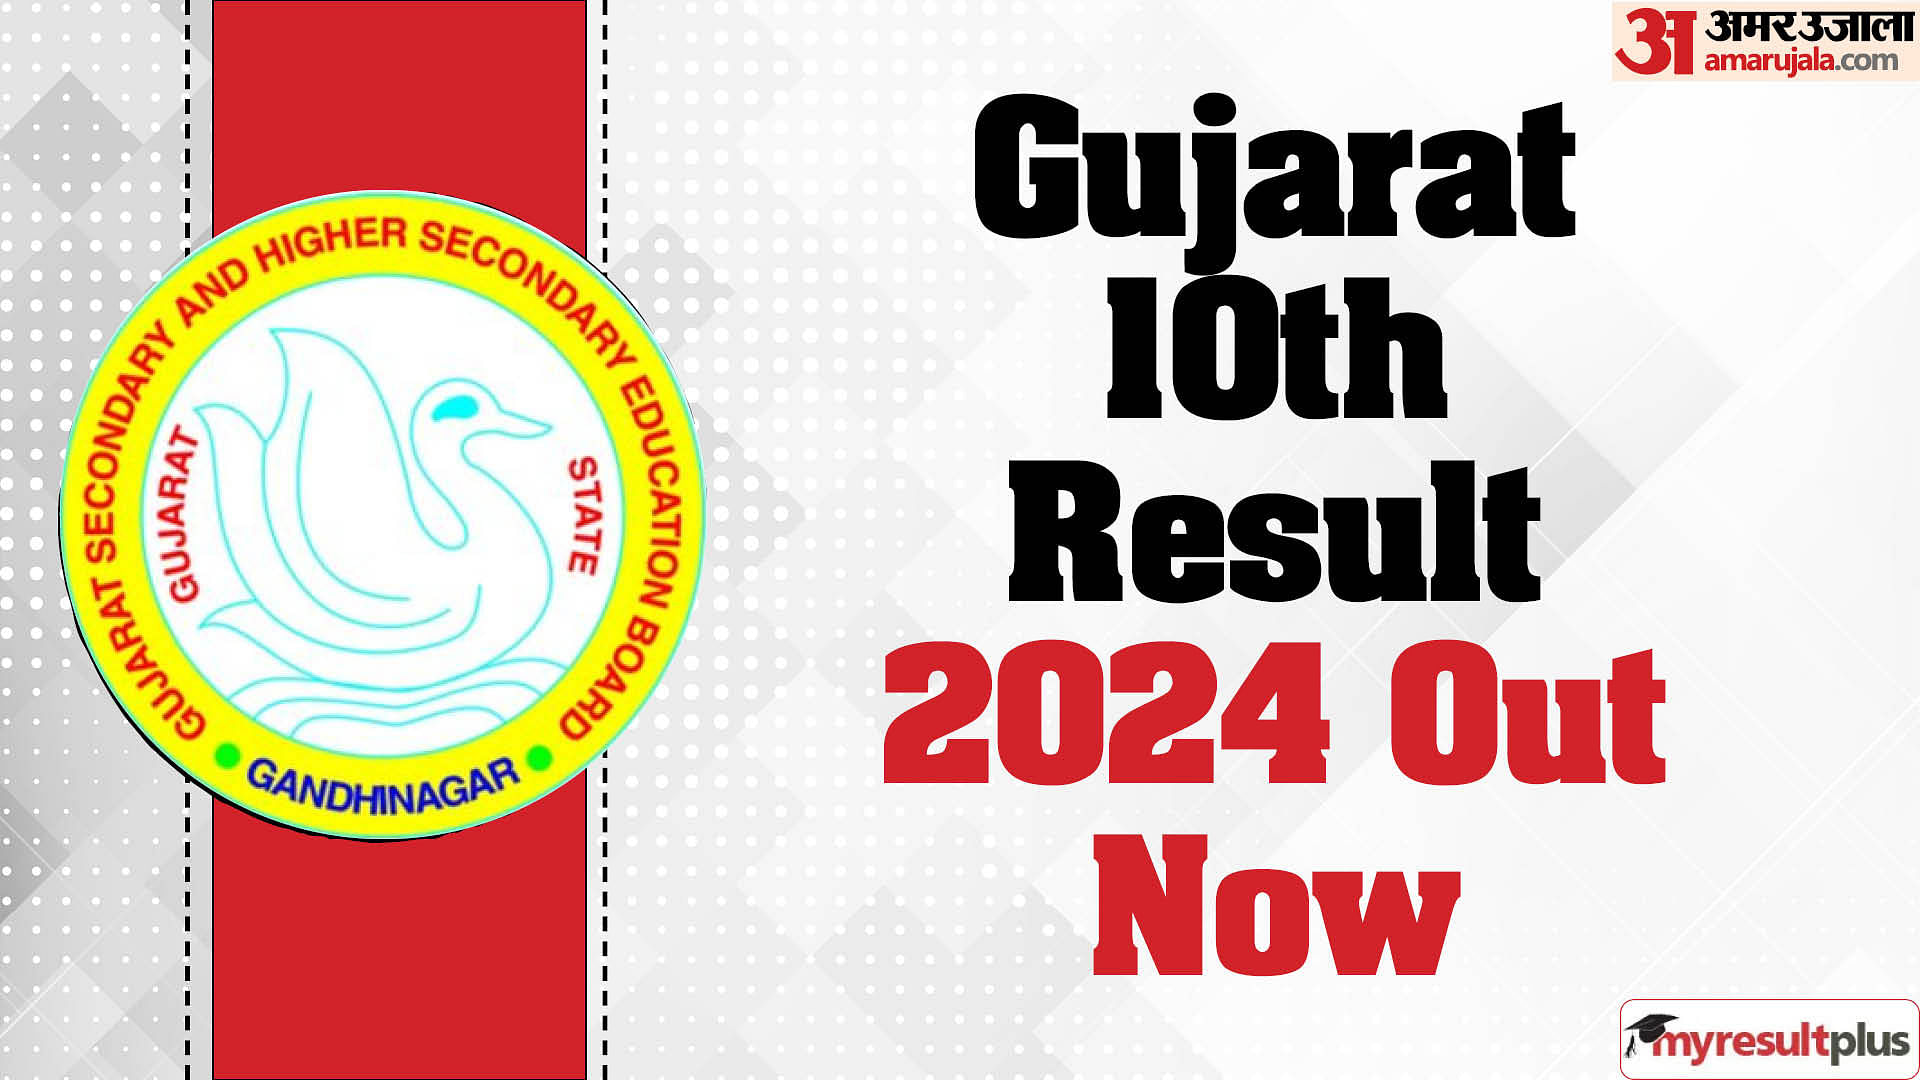 Gujarat Board 10th Result 2024 Out now, Pass percentage stood at 82.56%, Read more details here